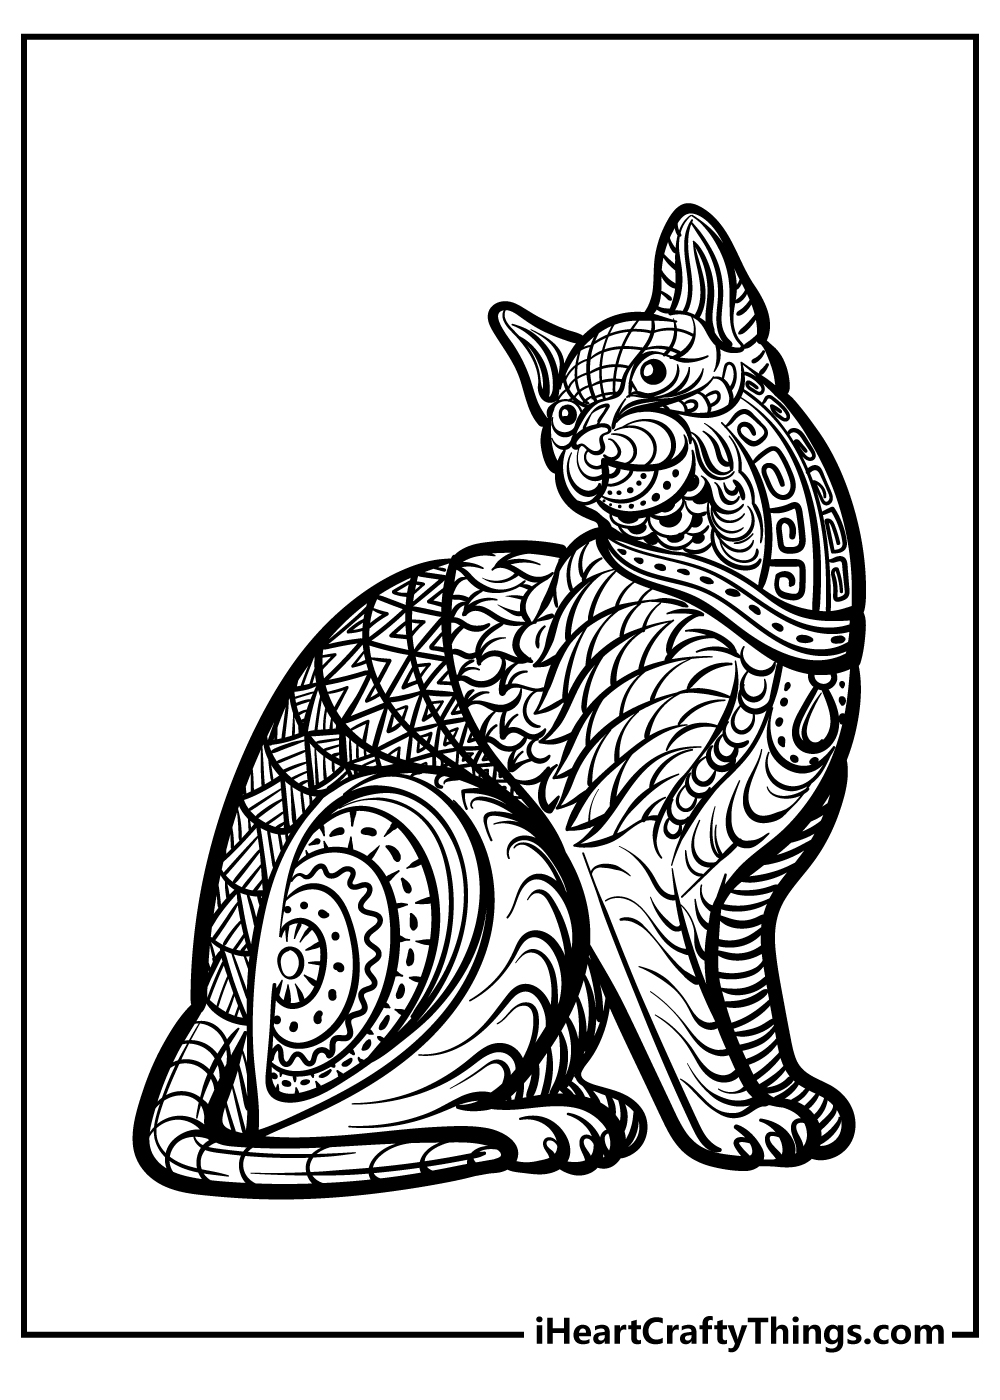 Adult Coloring Pages free download